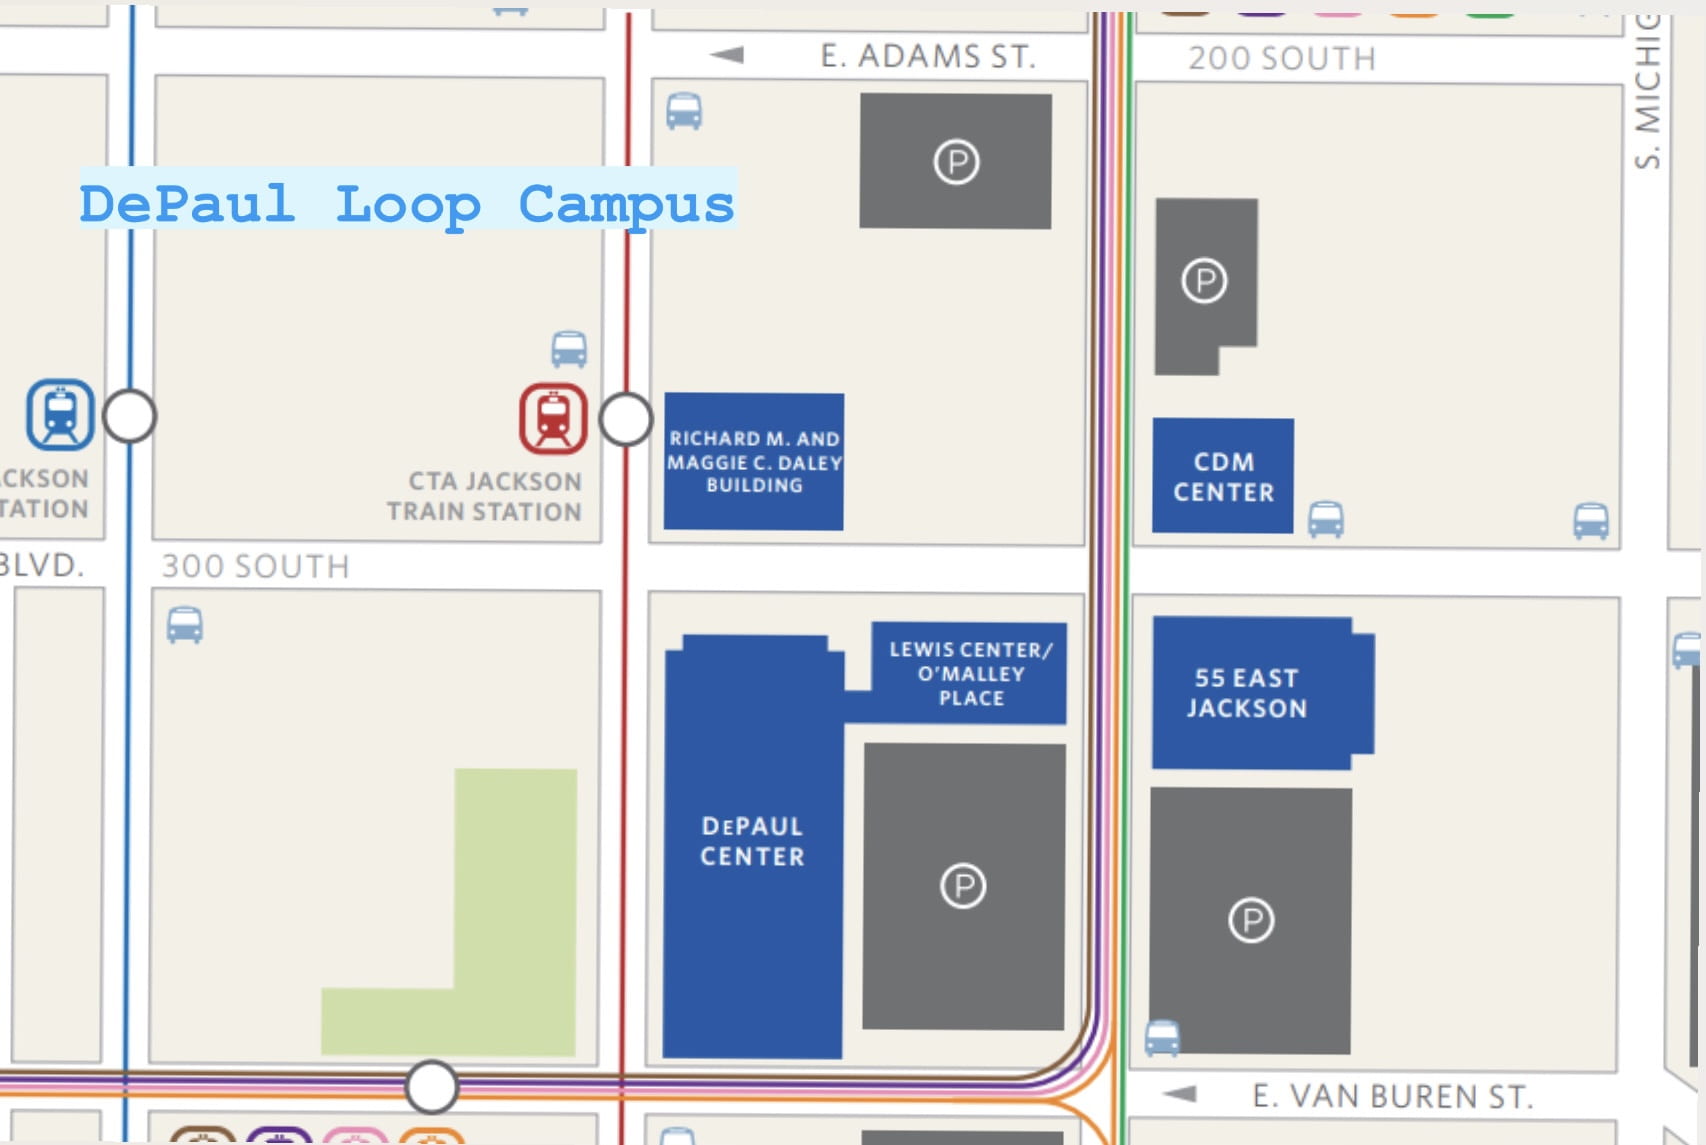 A map of DePauls loop campus in Chicago, outlining the different buildings and “L” lines.